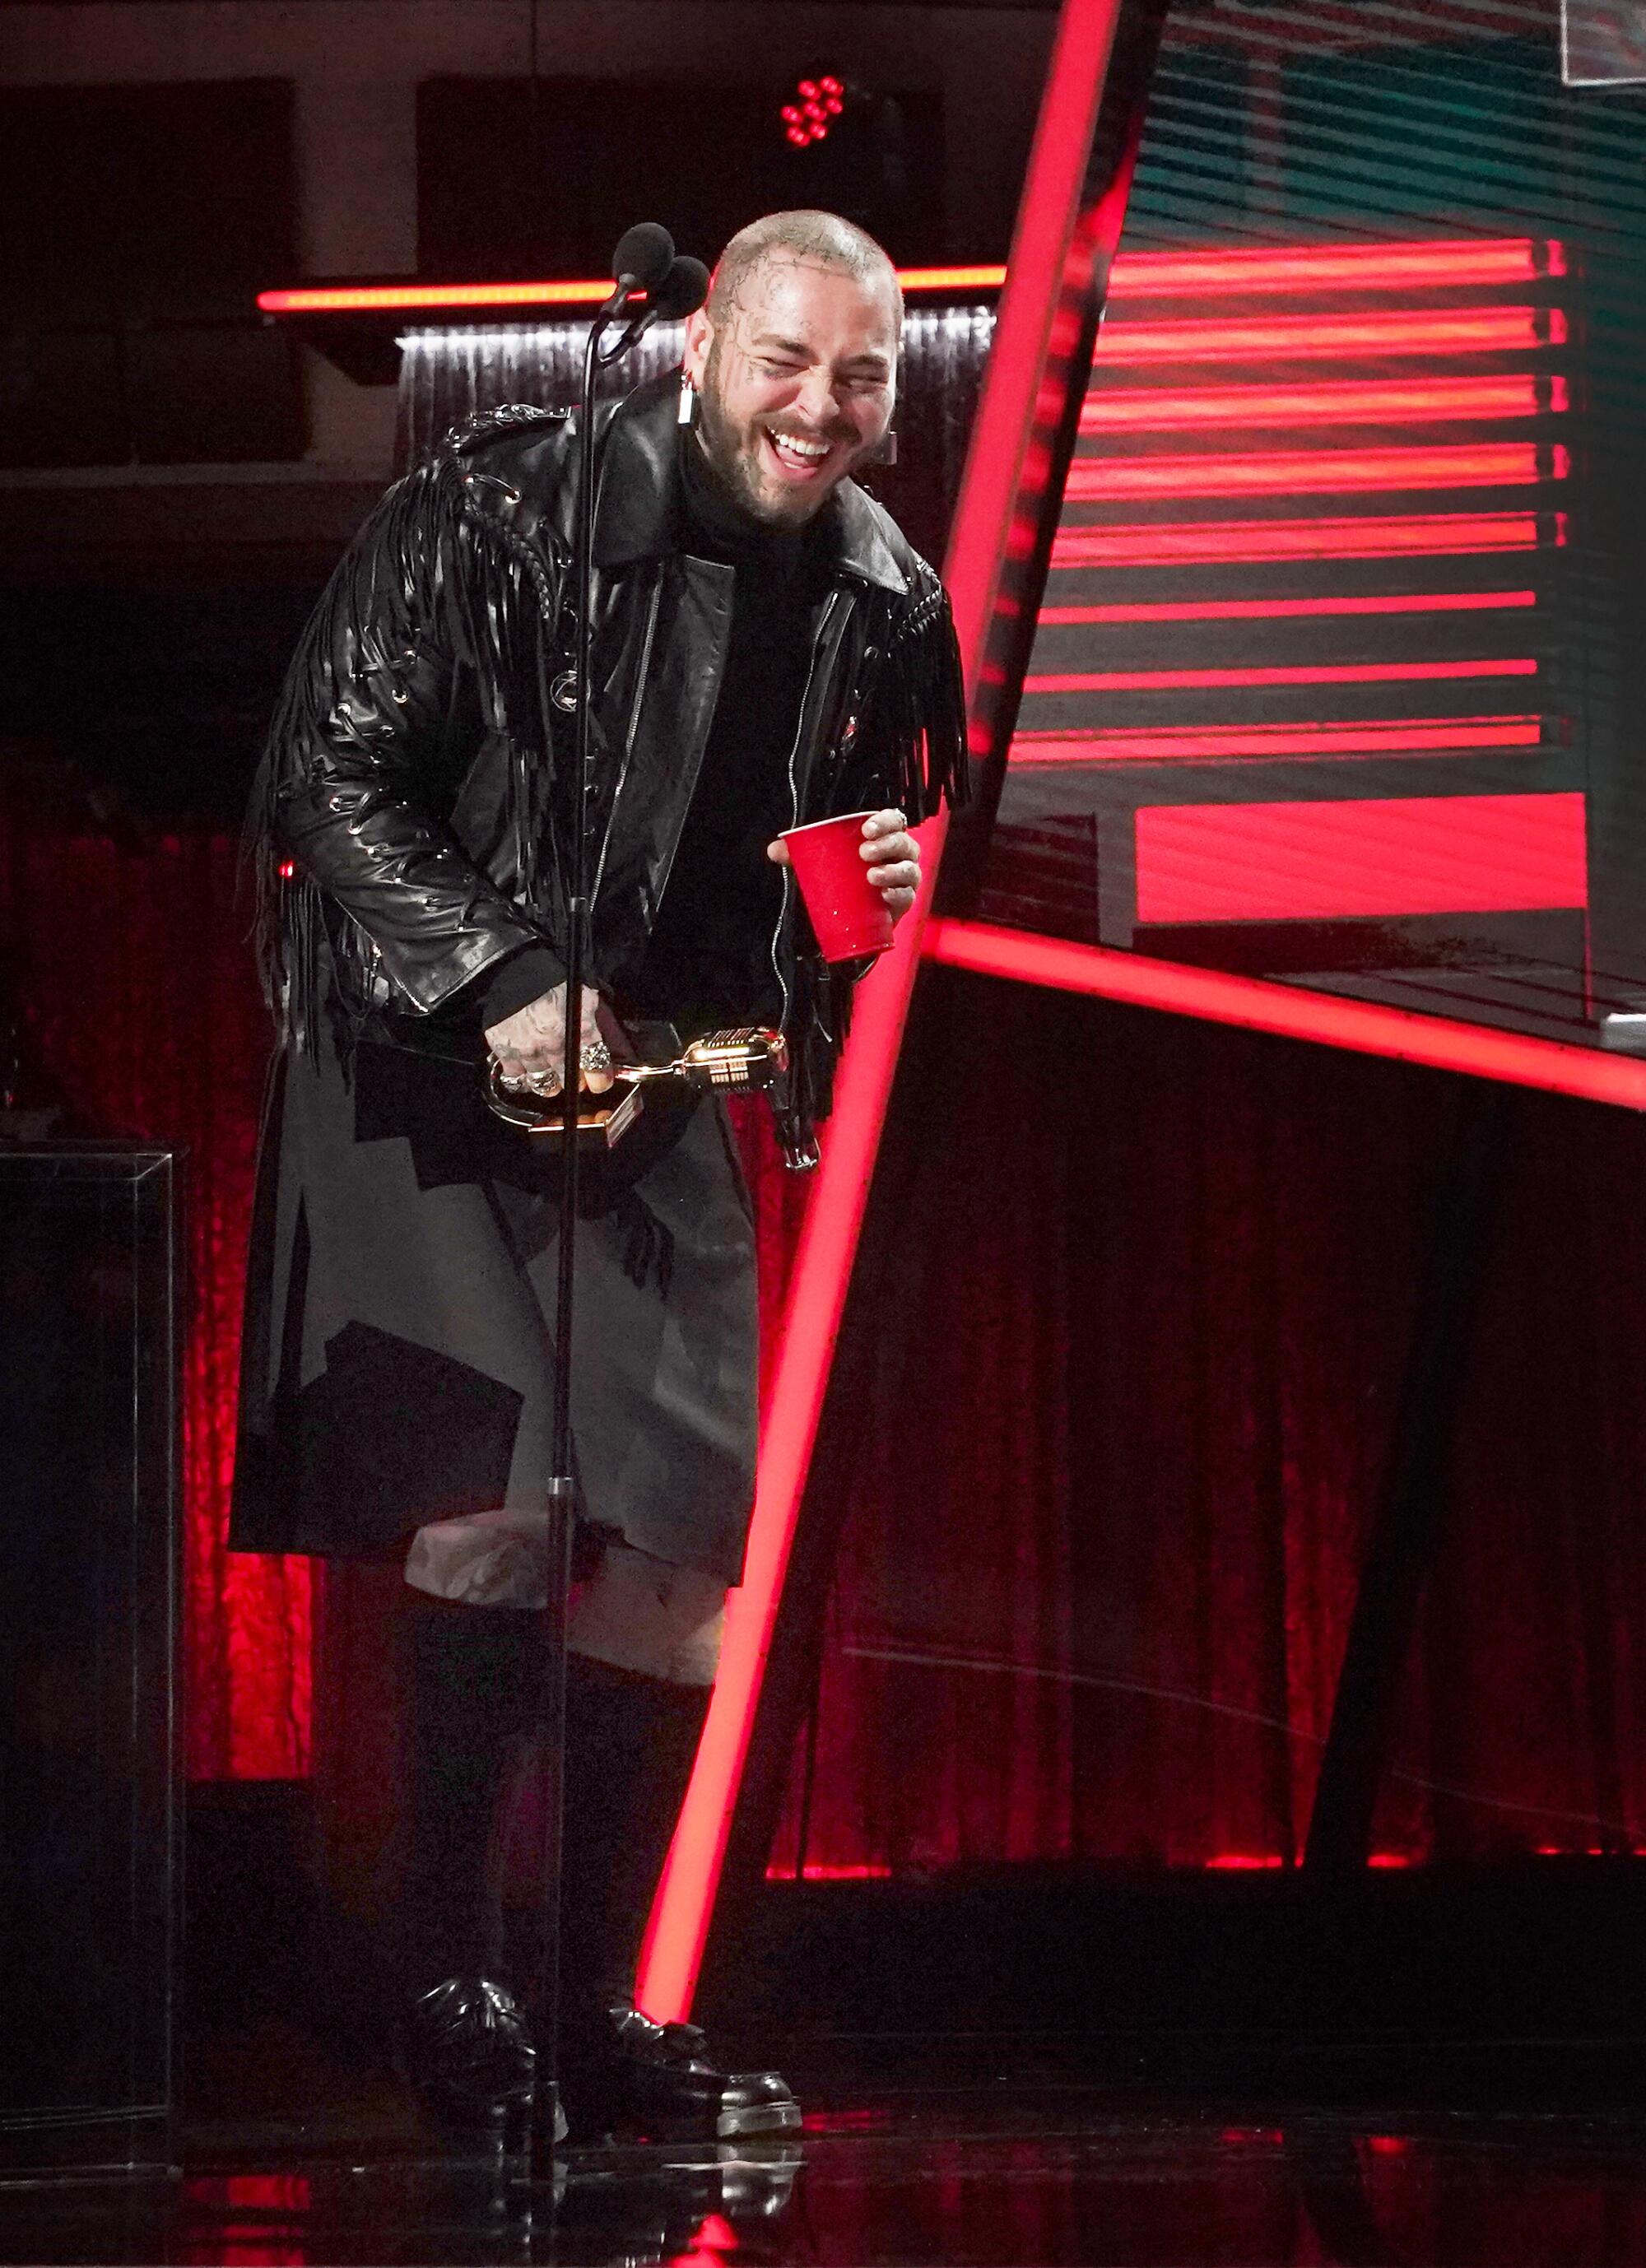 Post Malone laughs as he accepts an award.